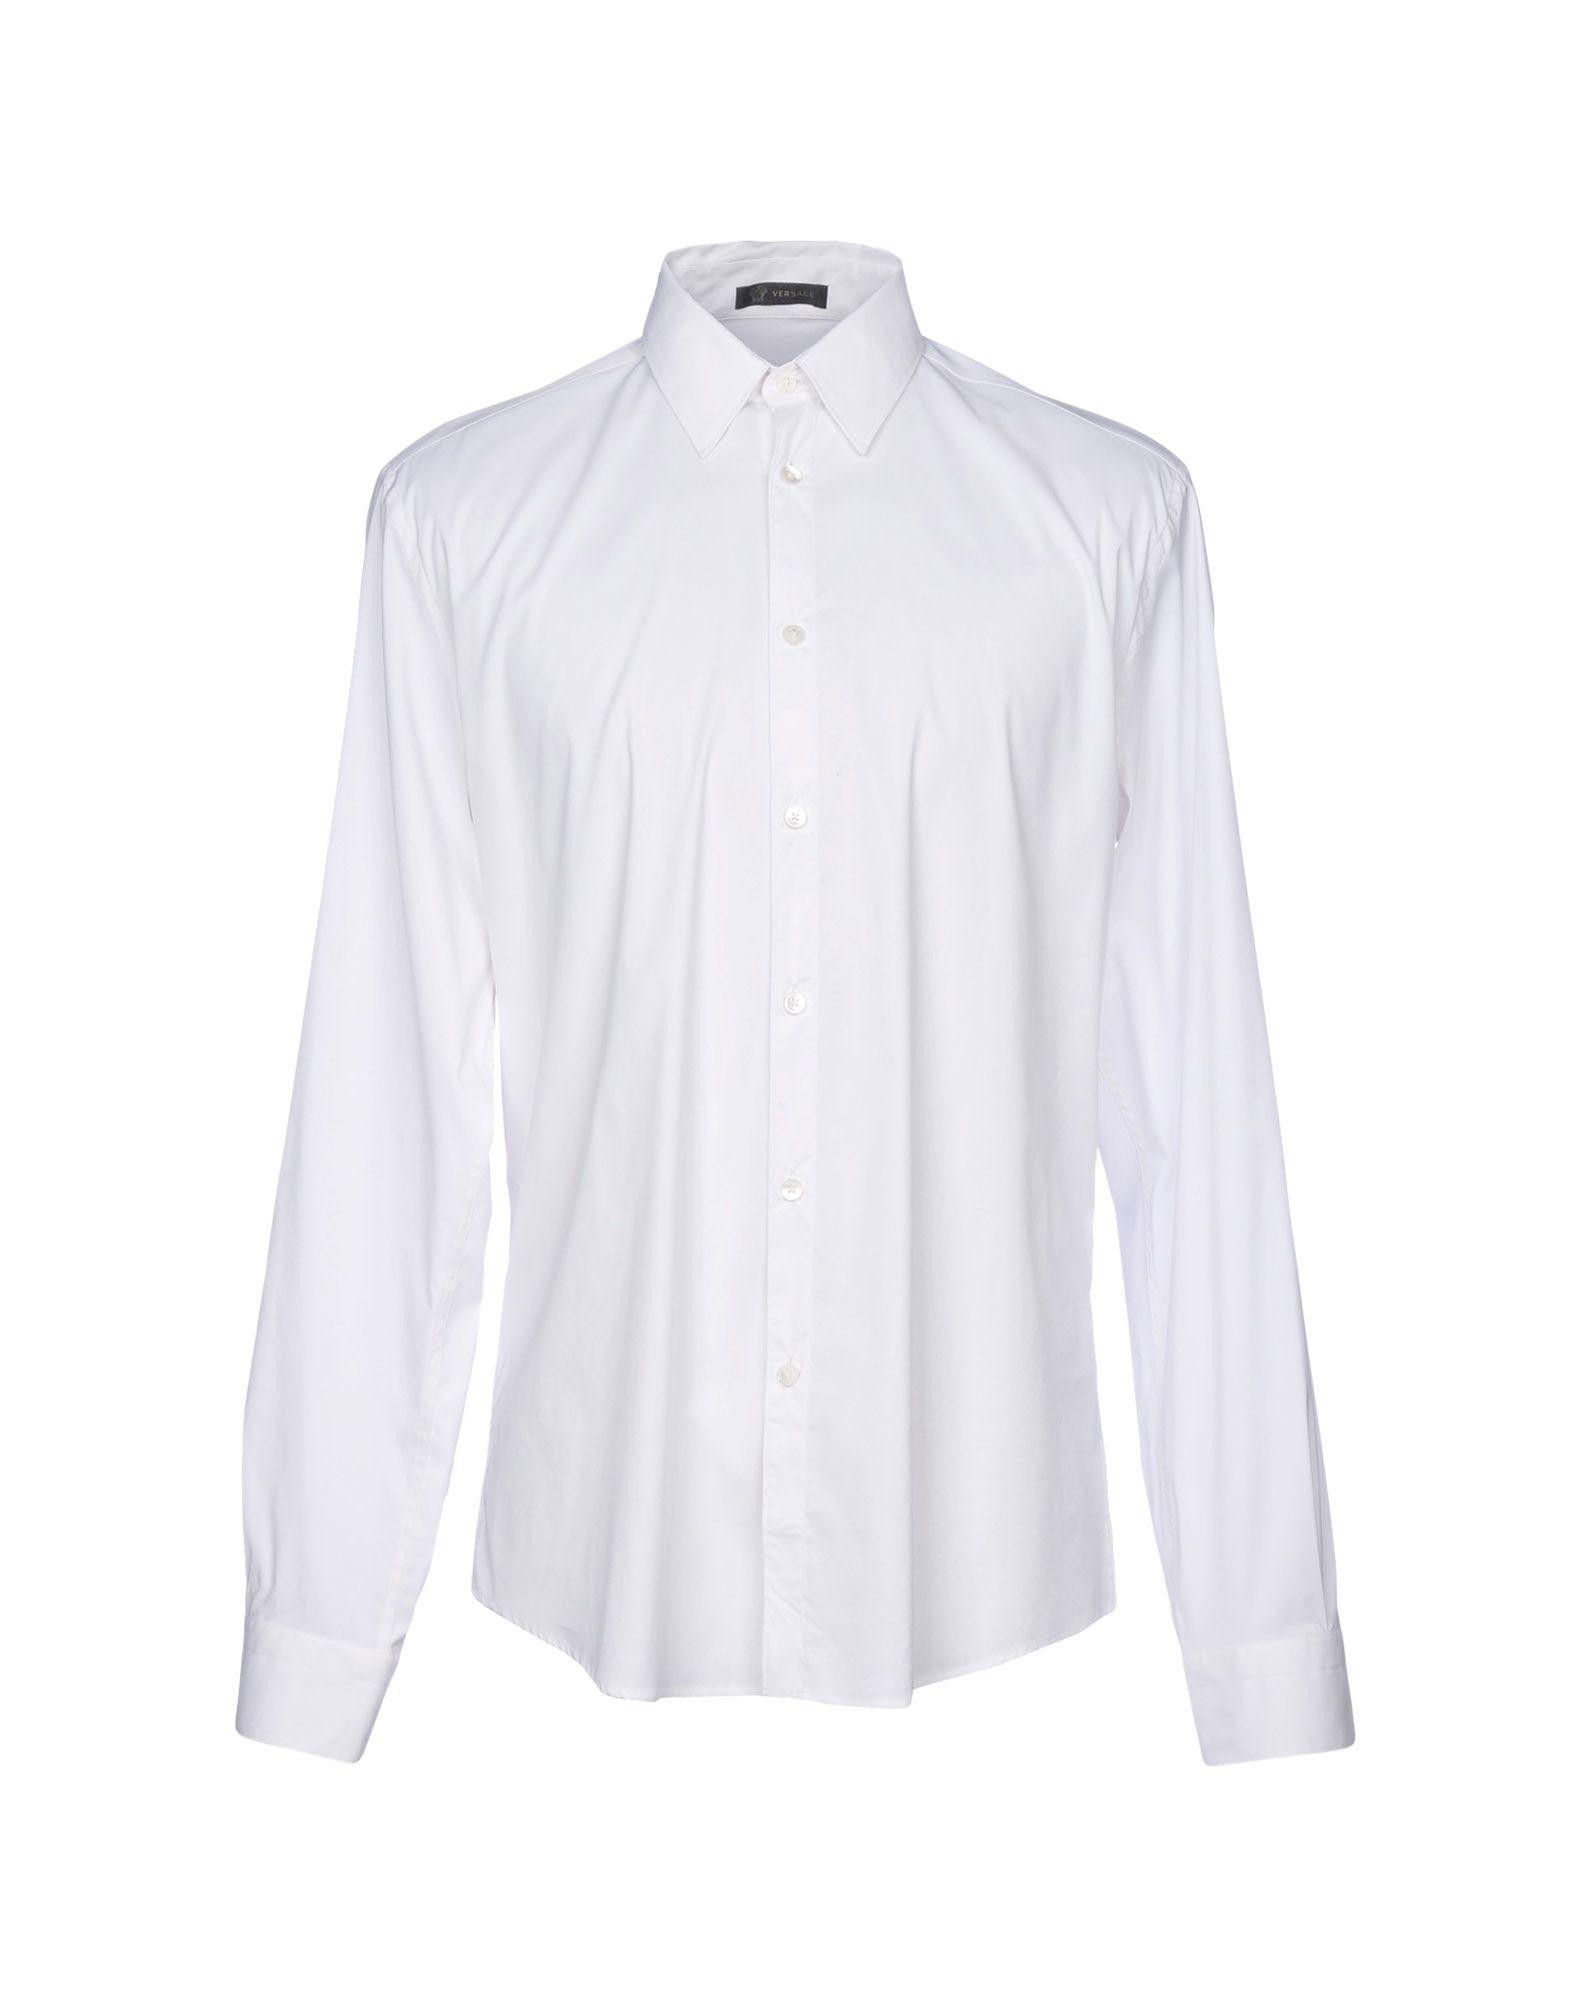 Versace Cotton Shirt in White for Men - Lyst